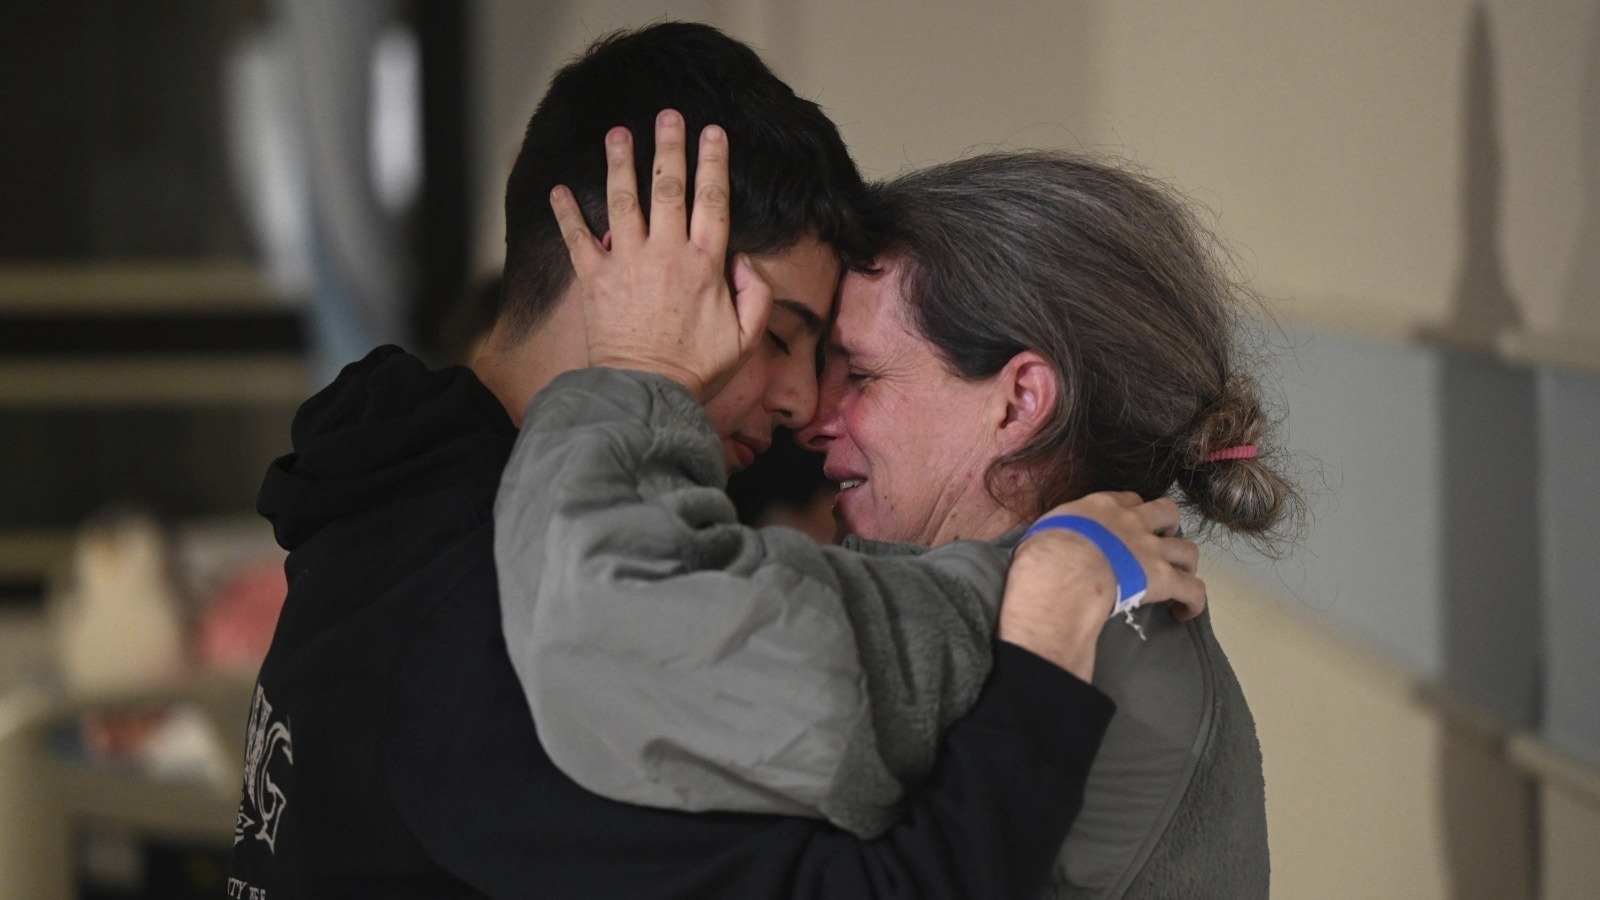 The accounts of freed Israeli hostages add pressure to save those still in captivity